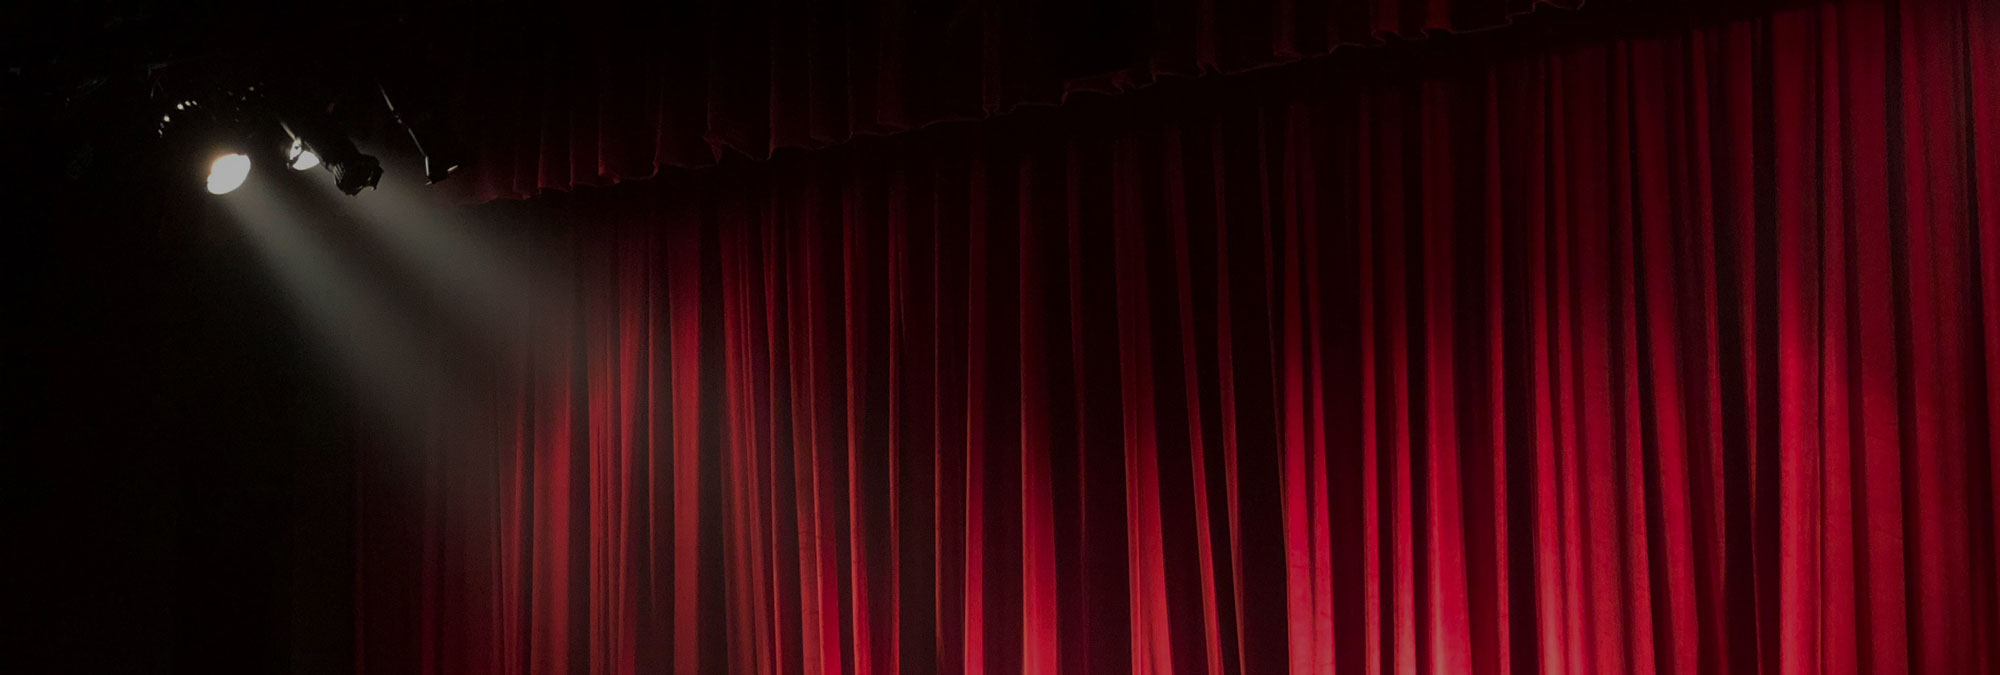 Red Curtains With A Light Shining On Them.